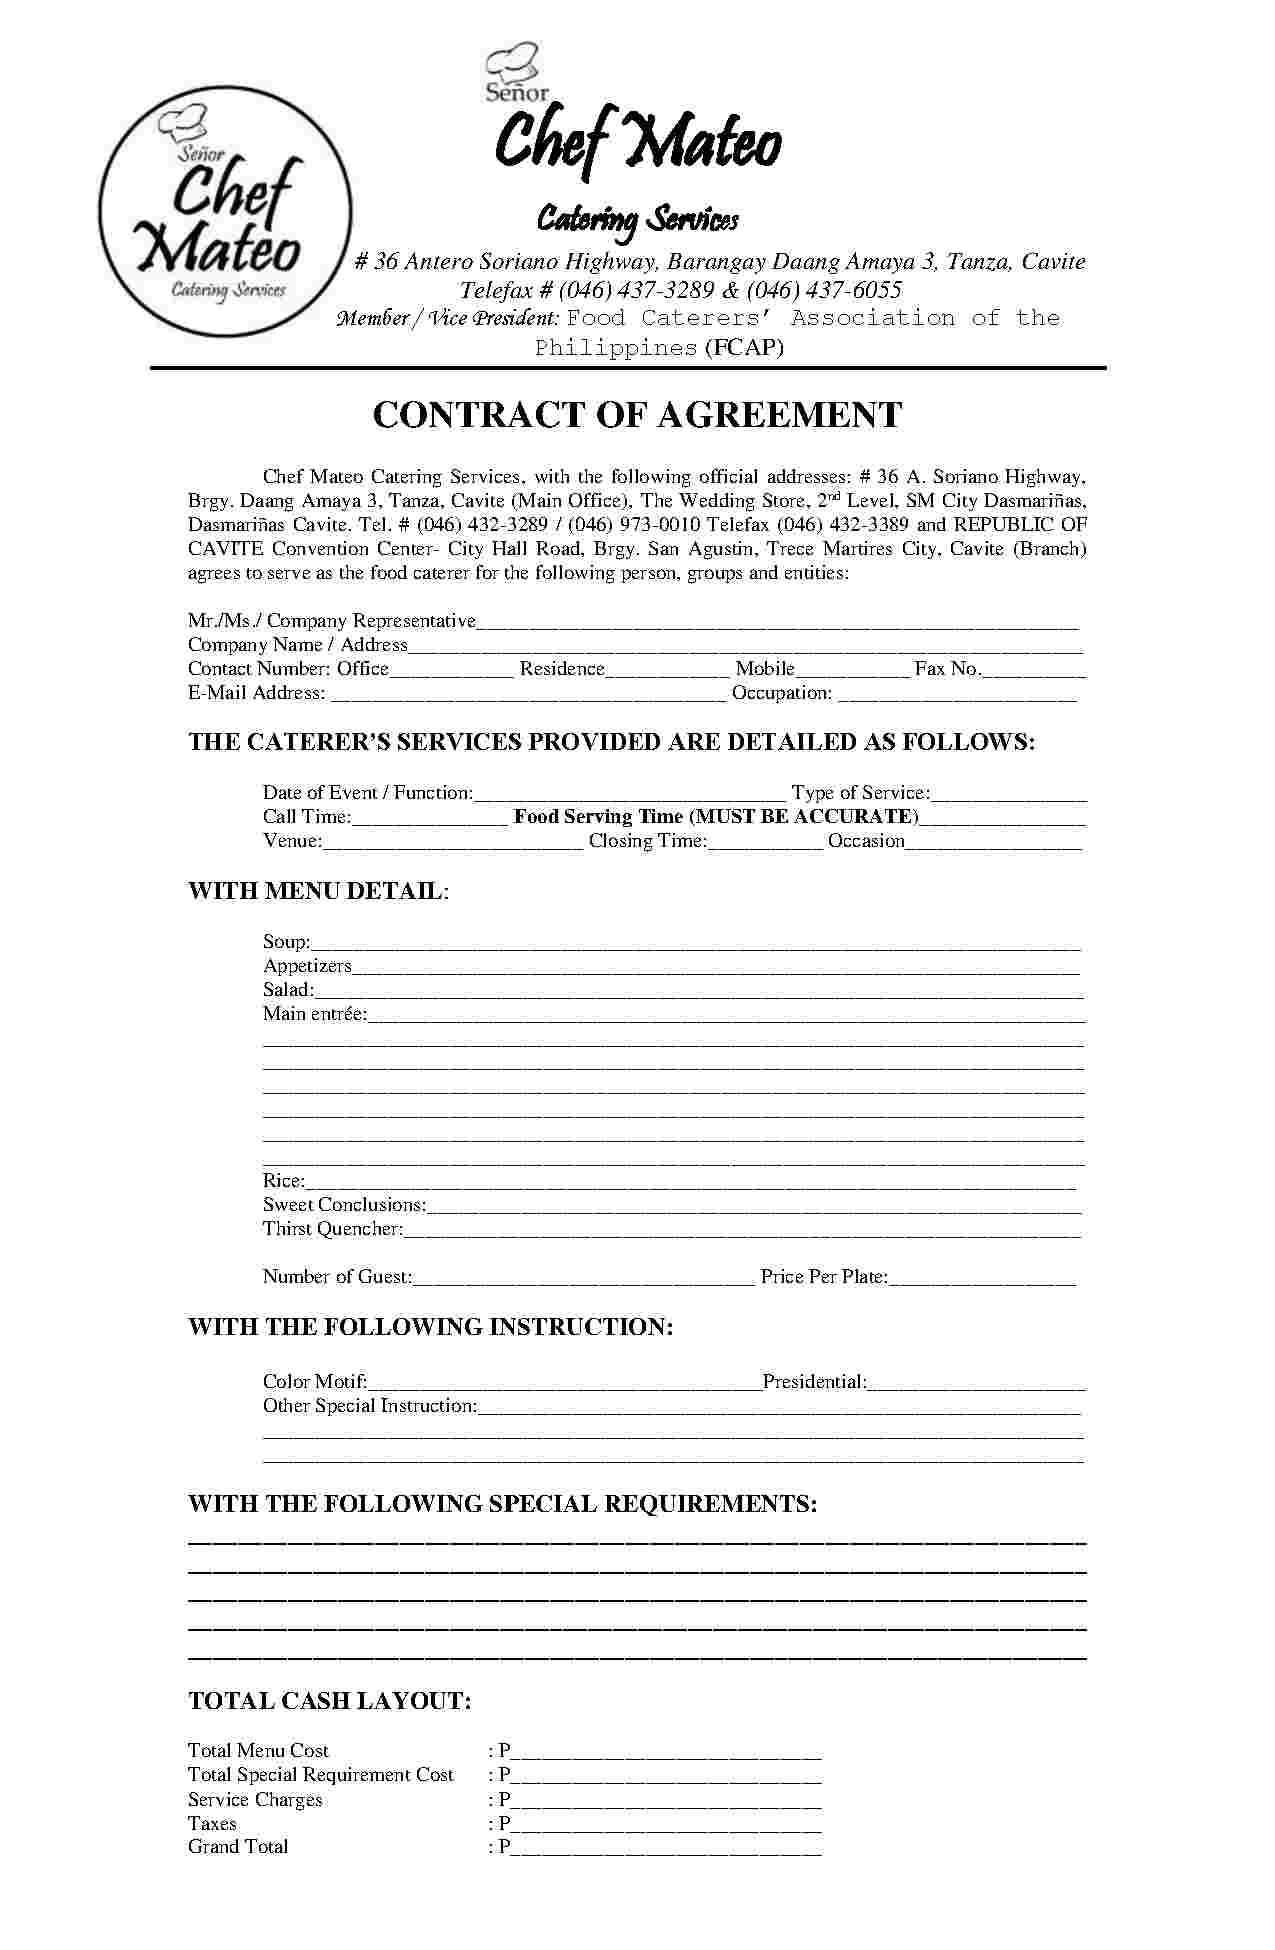 Download Catering Contract Style 5 Template For Free At Throughout Catering Contract Template Word